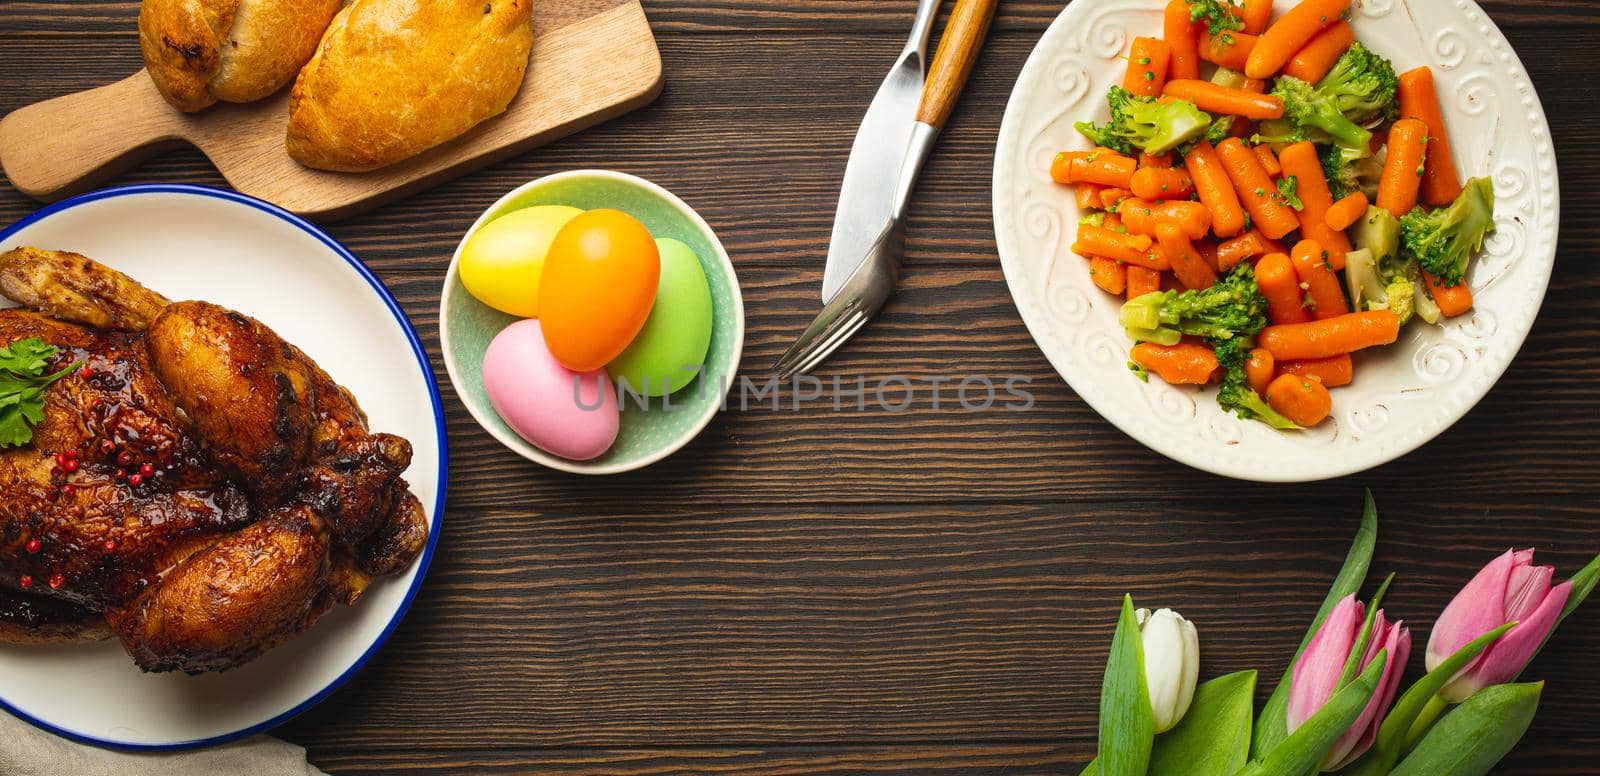 Easter food on dark rustic table: pastel colored eggs, roasted chicken, vegetables, buns by its_al_dente